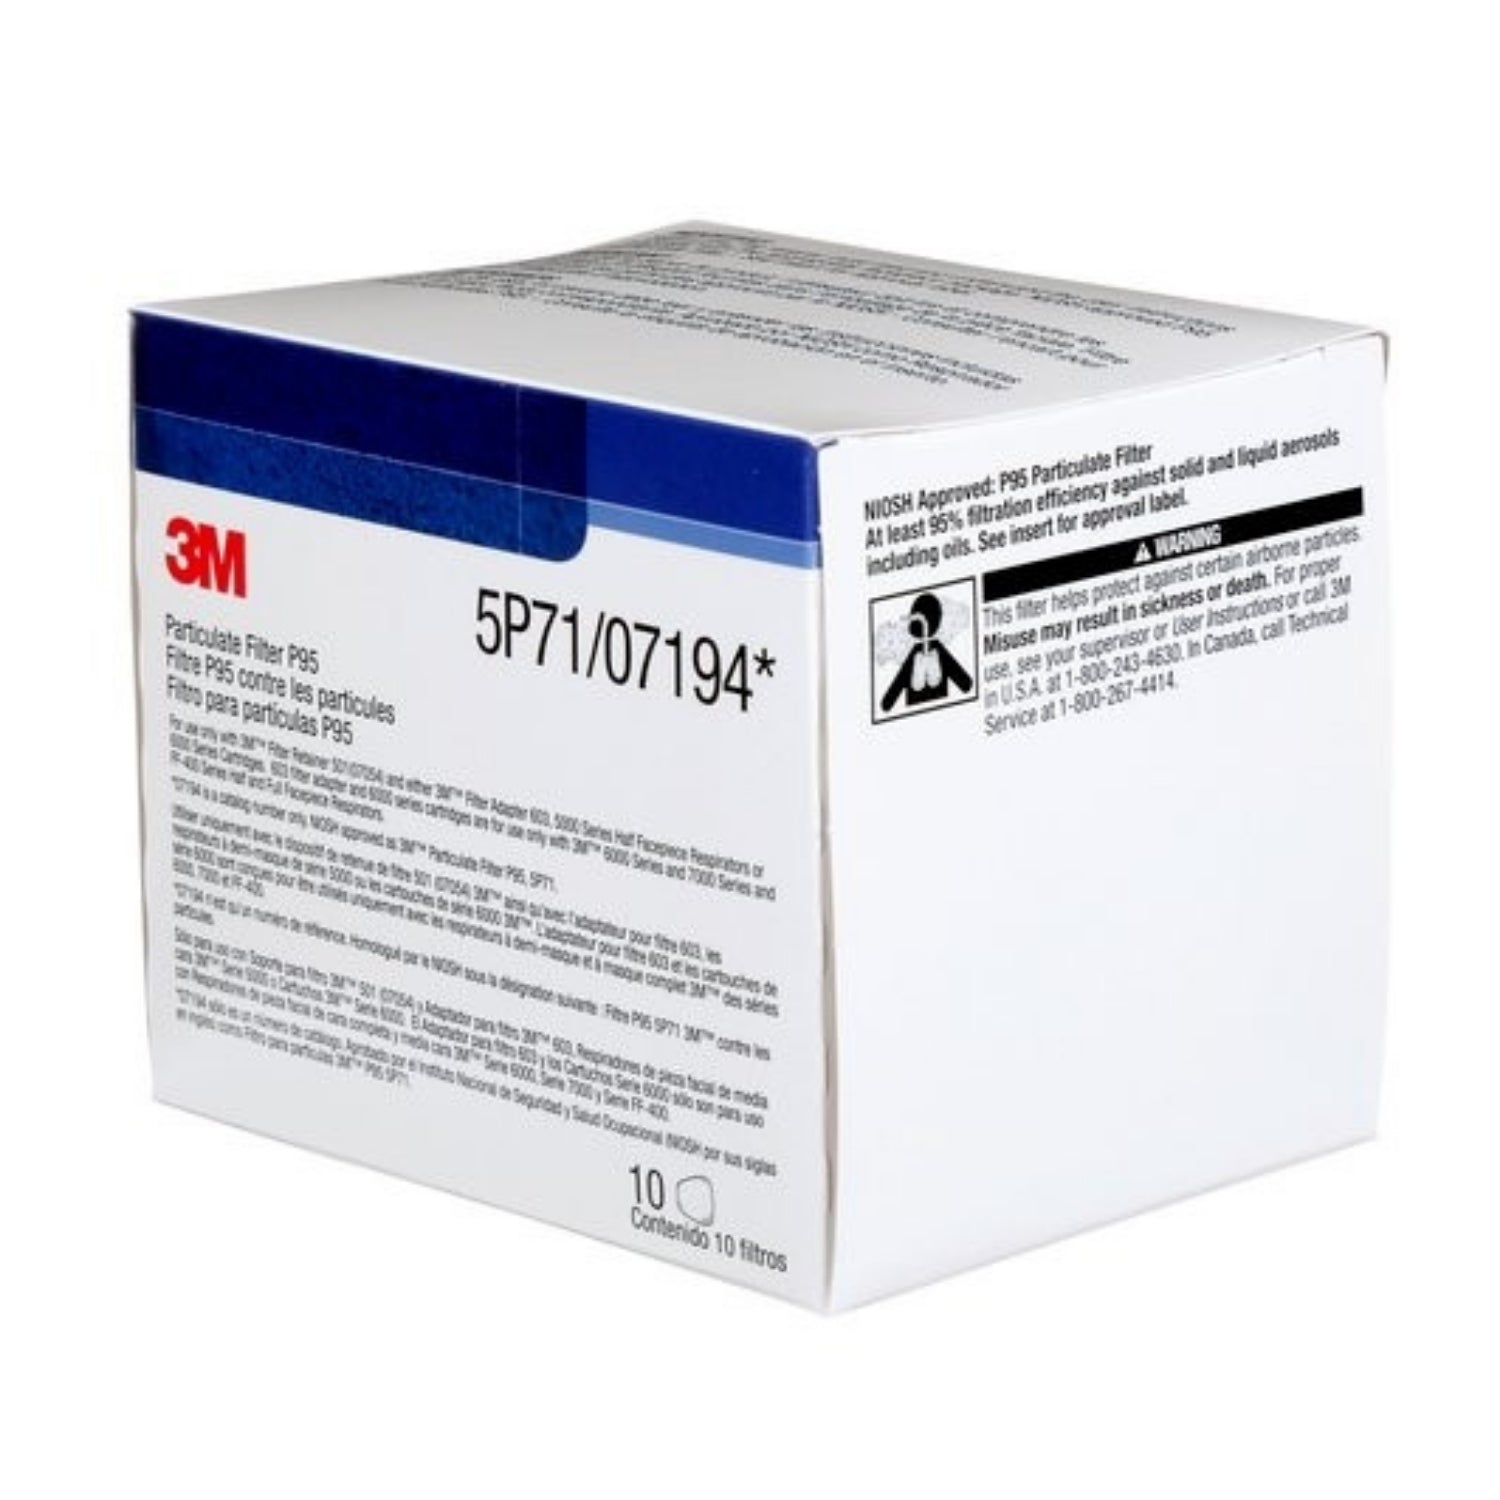 3M™ Particulate Filter 5P71/07194(AAD), P95 100 - Certain Oil/Non-Oil Particles